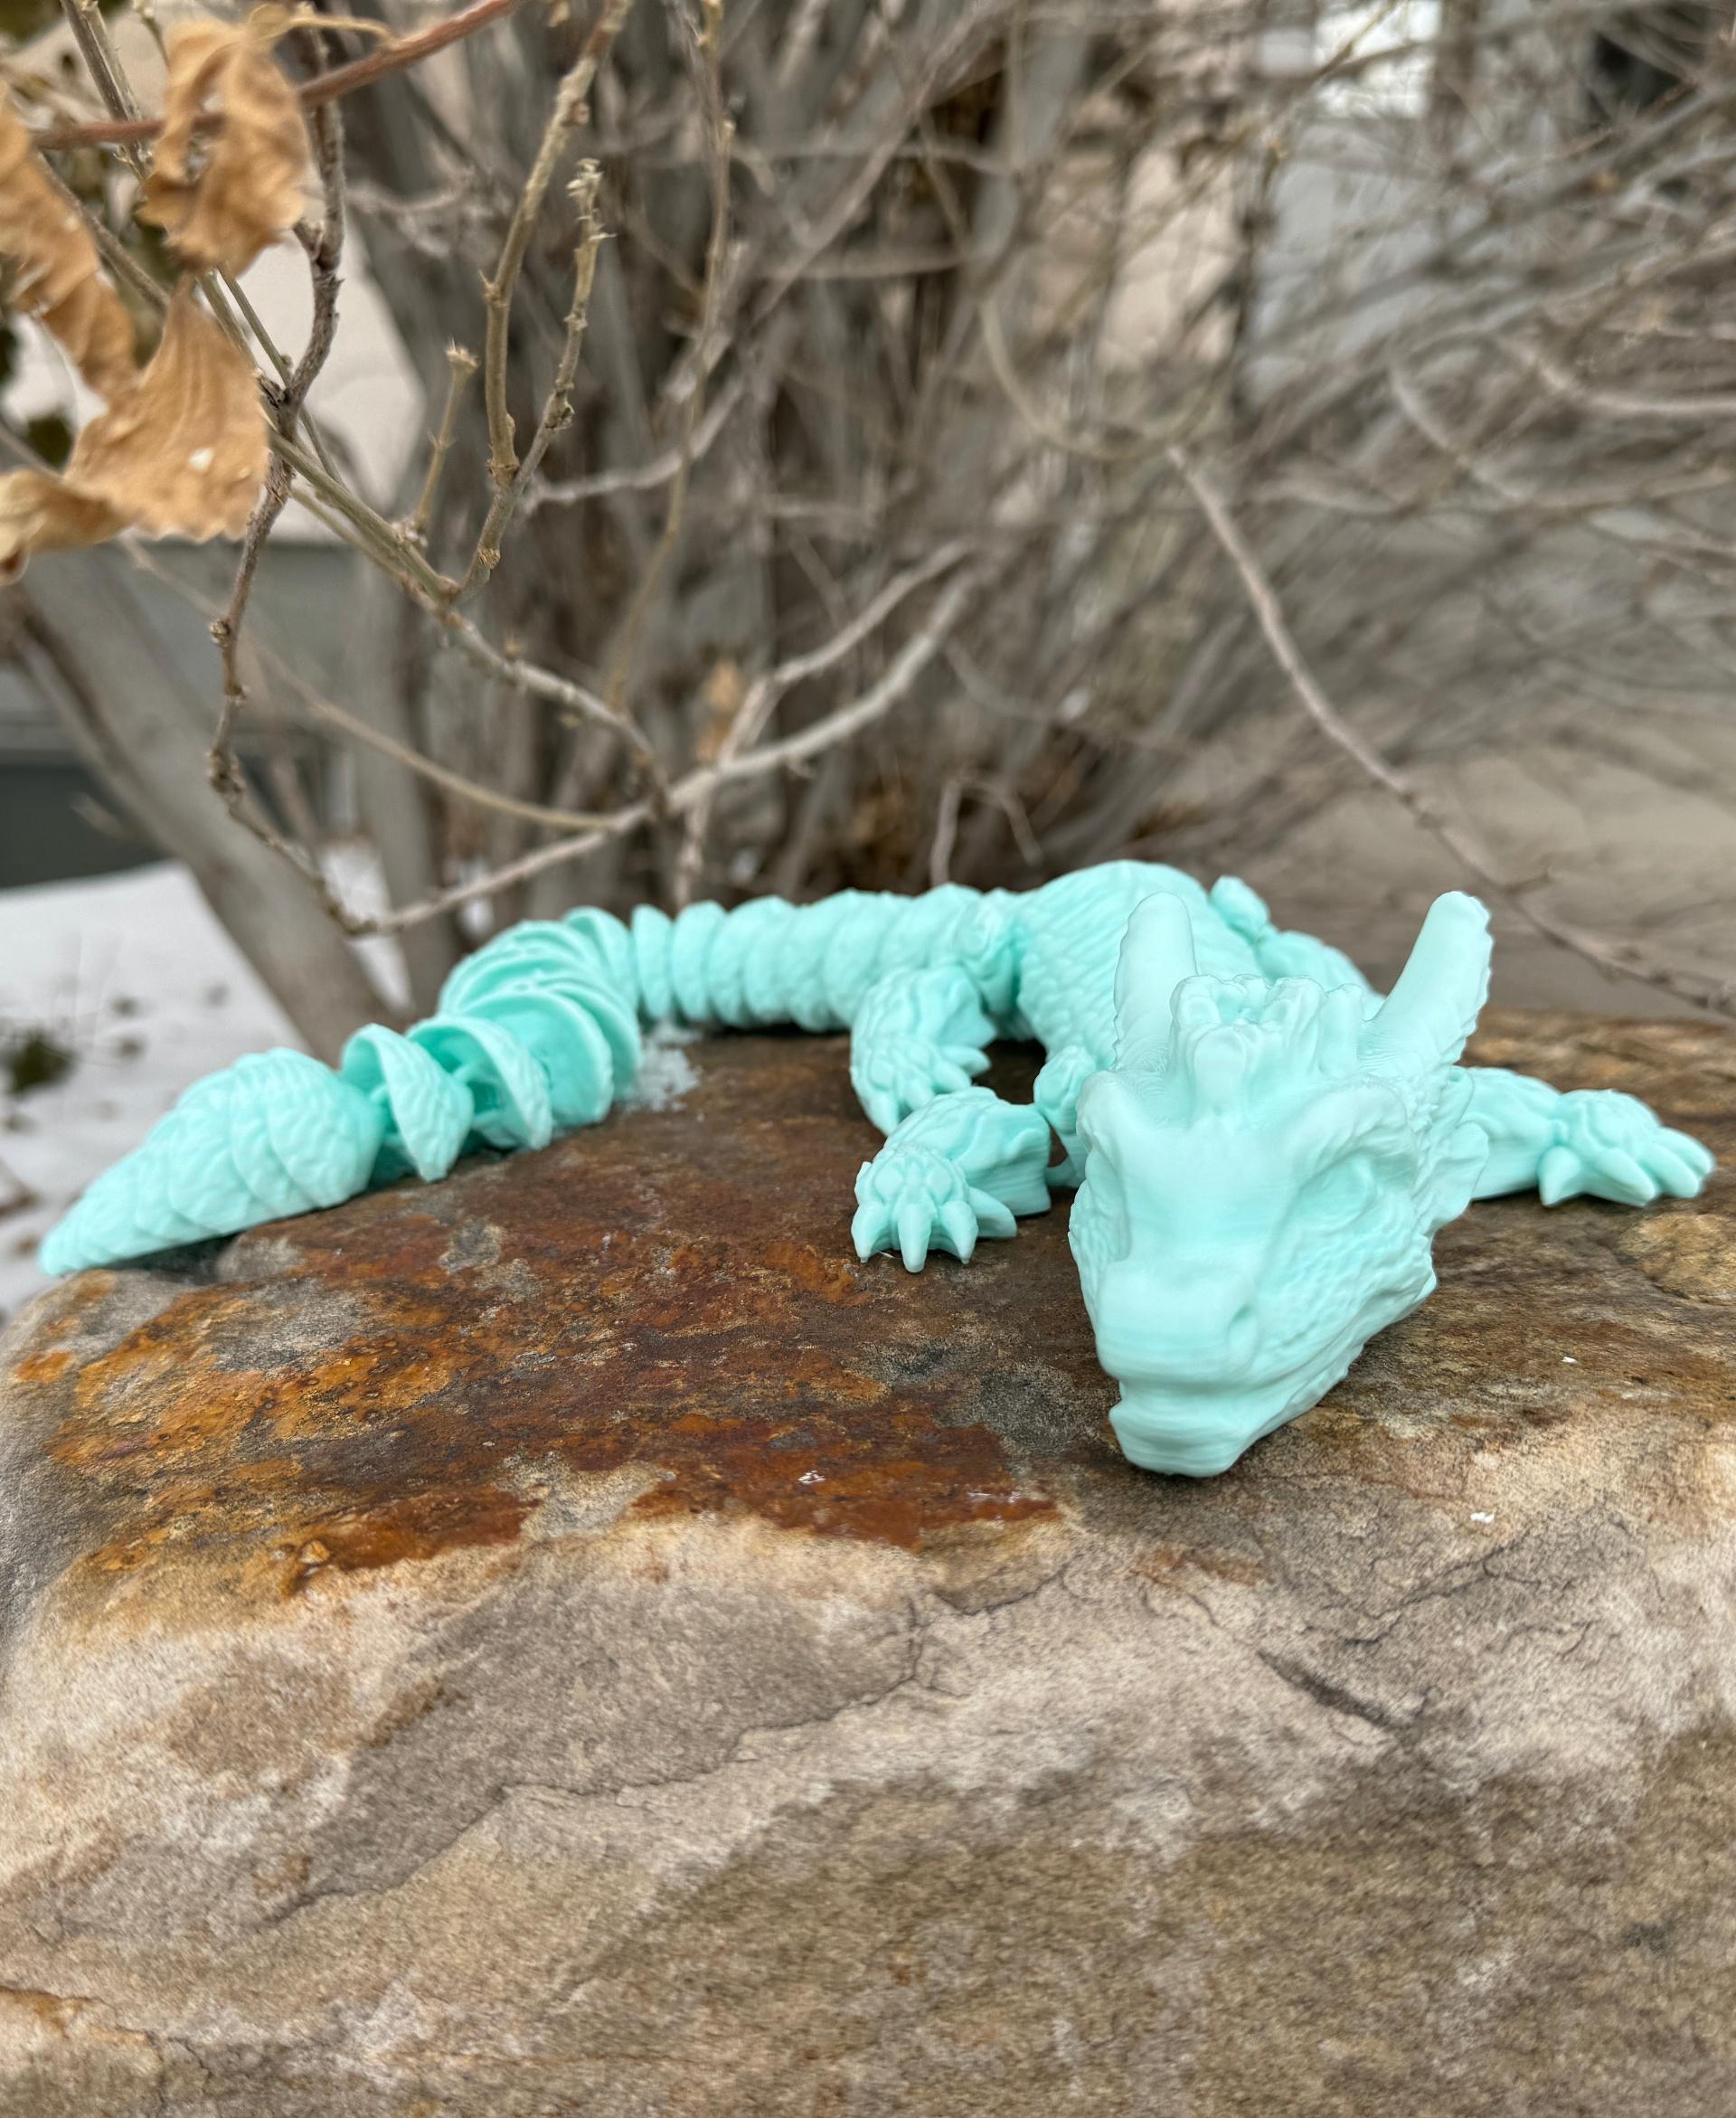 Chip, Wood Dragon - Articulated Dragon Snap-Flex Fidget (Medium Tightness Joints) - Chip put on his Winter colors to blend into the snow and ice. - 3d model